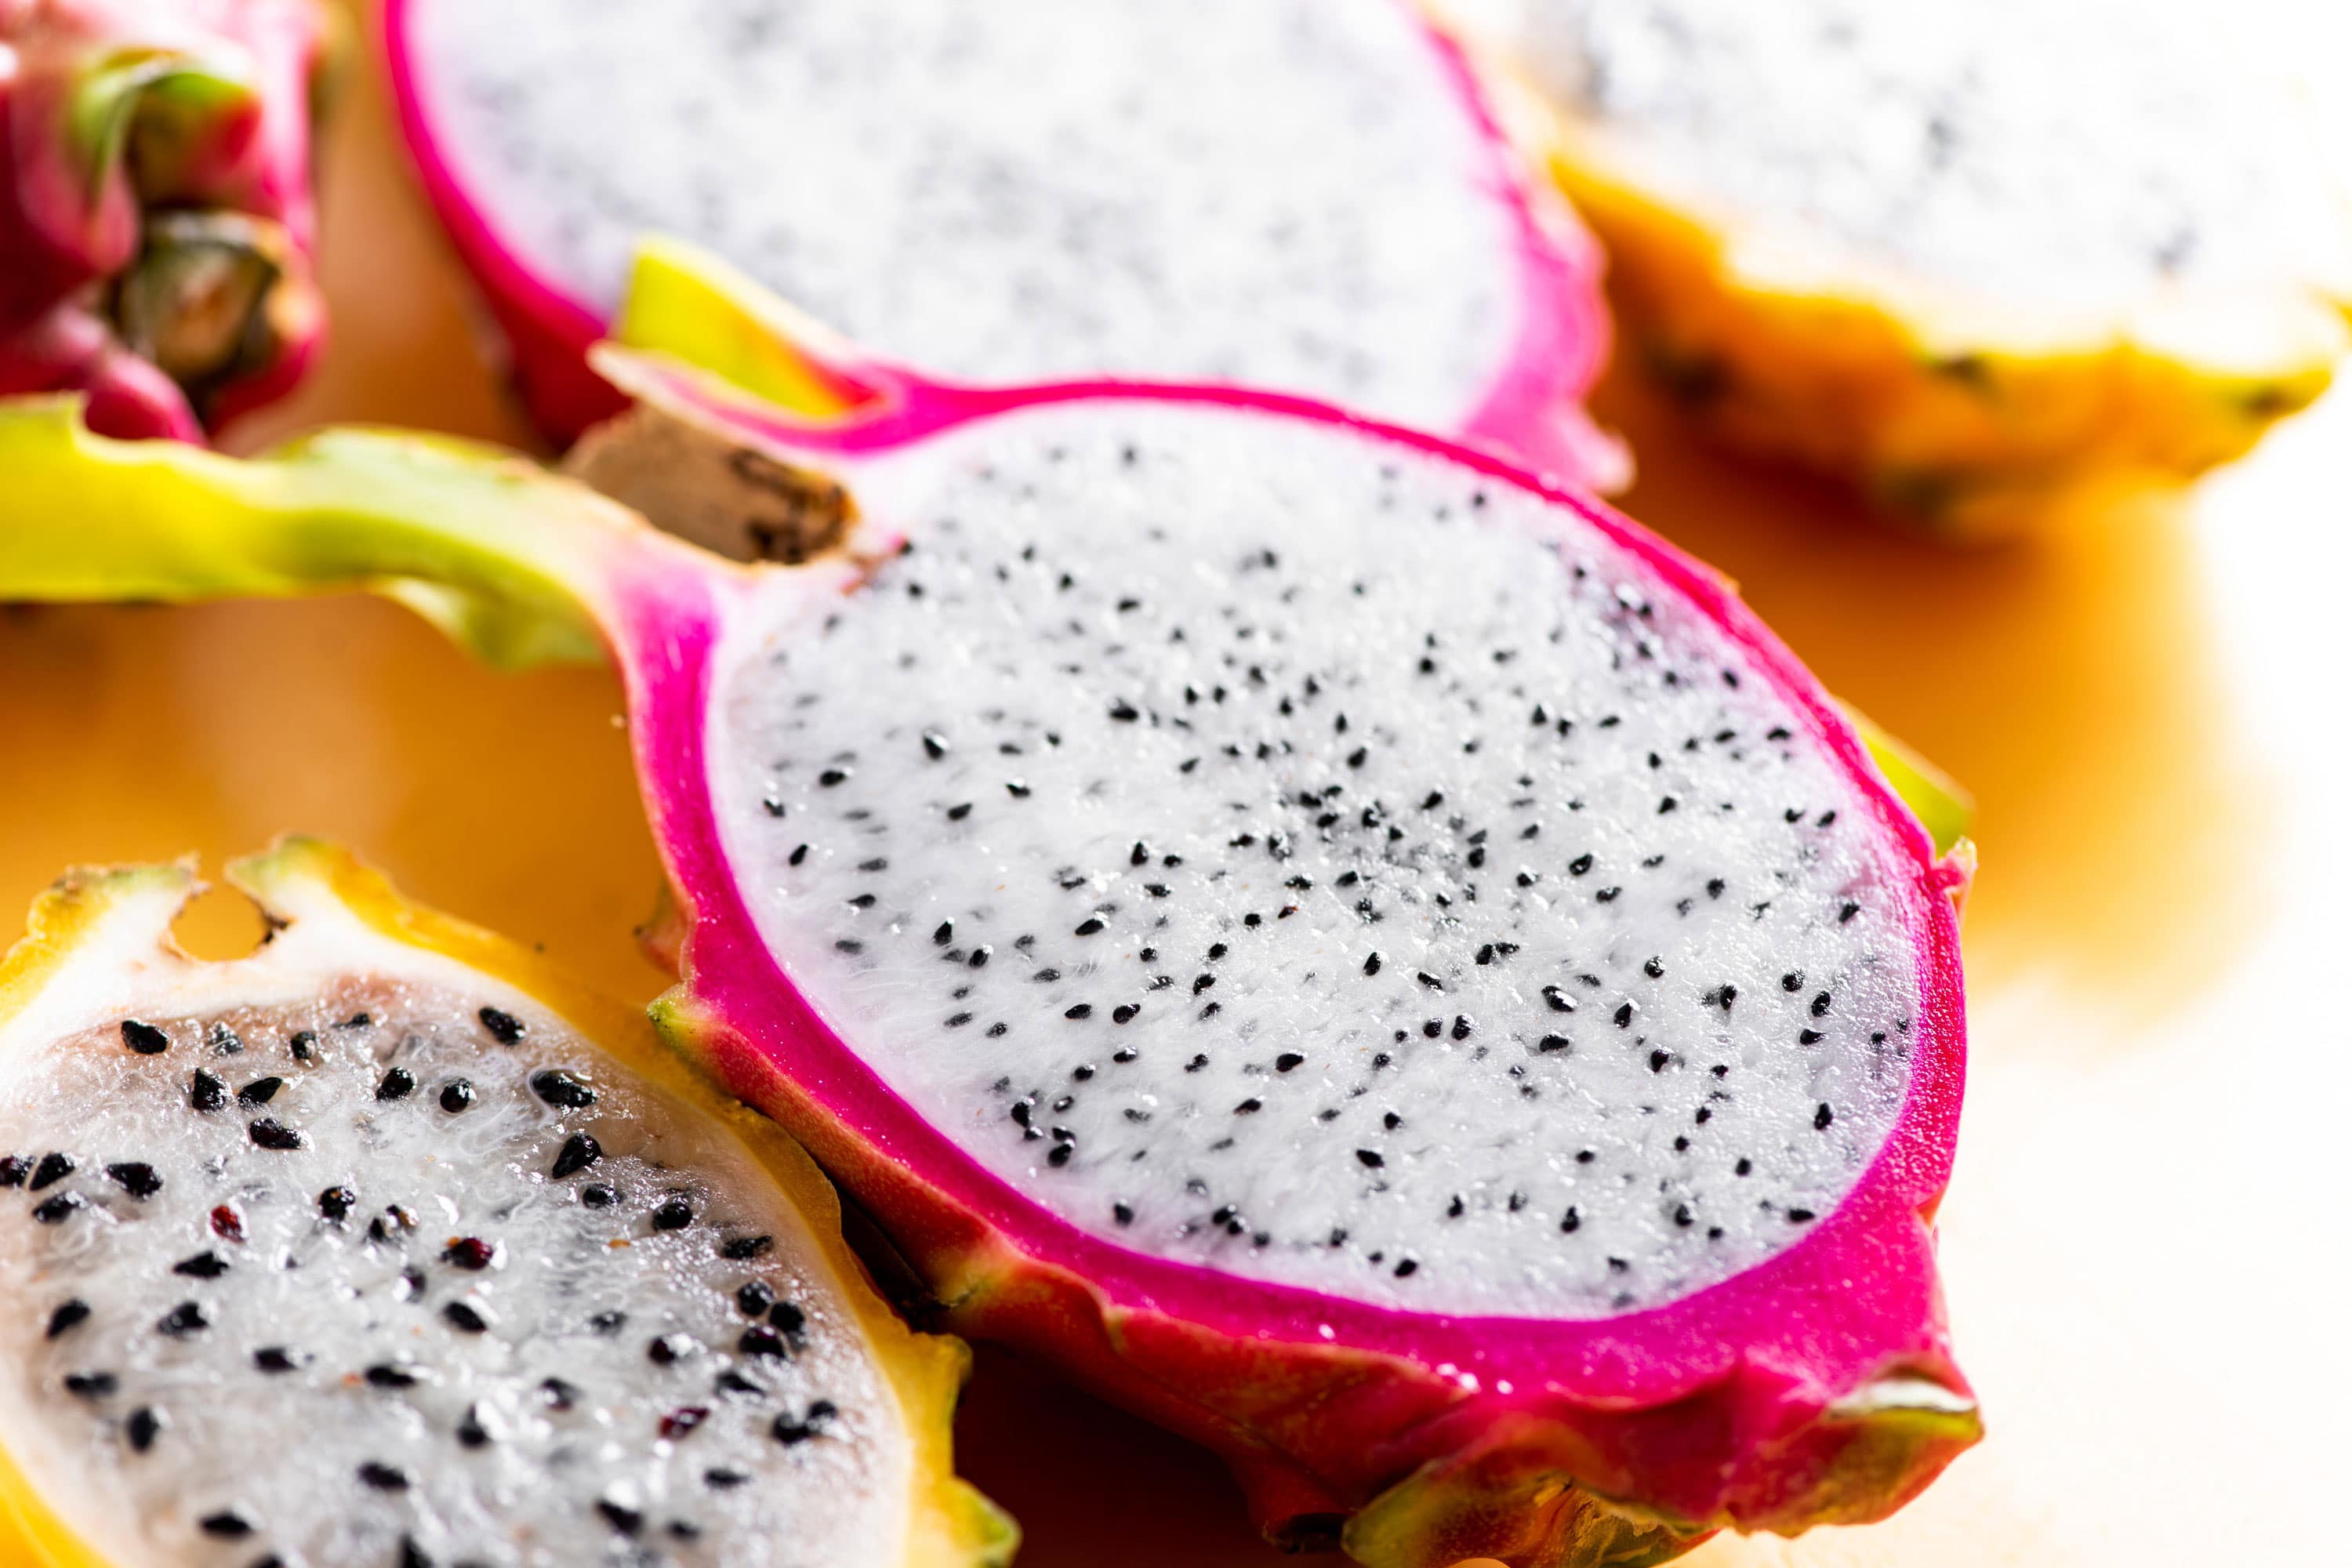 How To Prepare And Eat Dragon Fruit The Mom 100,Vols Animal